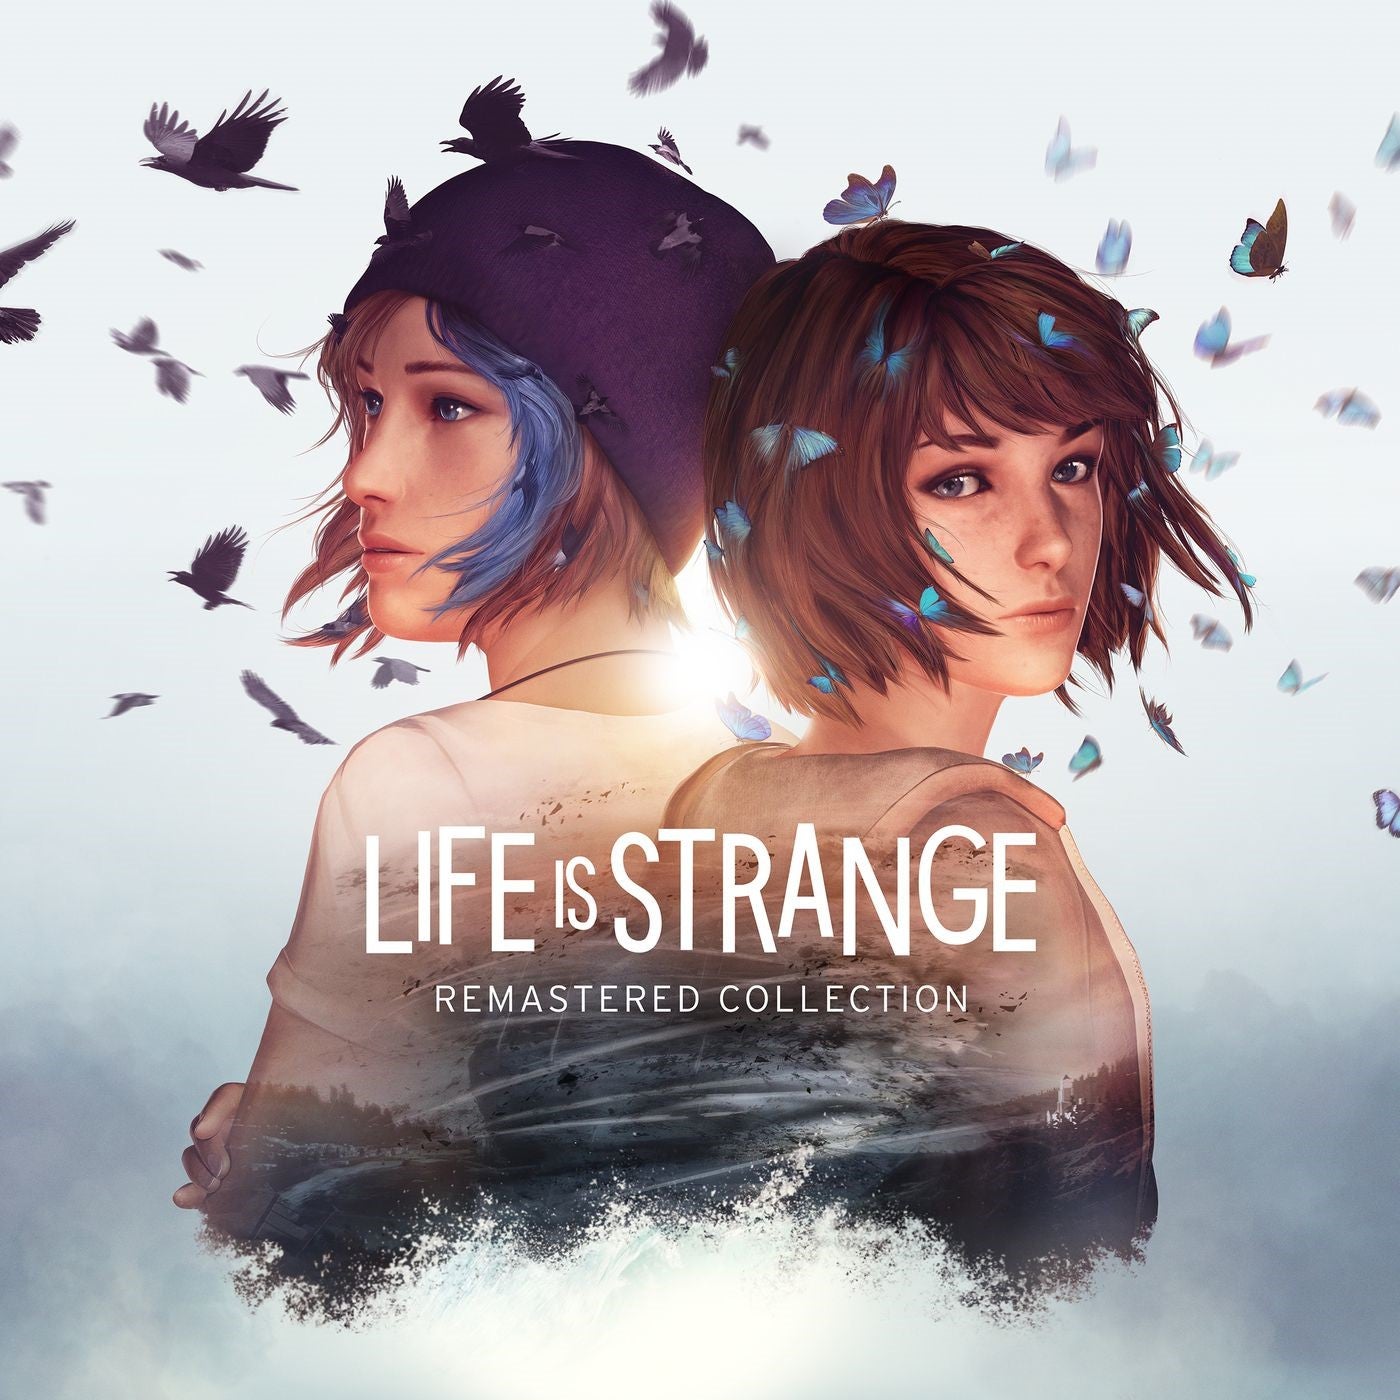 Drawing of upper body of two girls back to back with crows flying around their heads with text Life is Strange: Remastered Collection